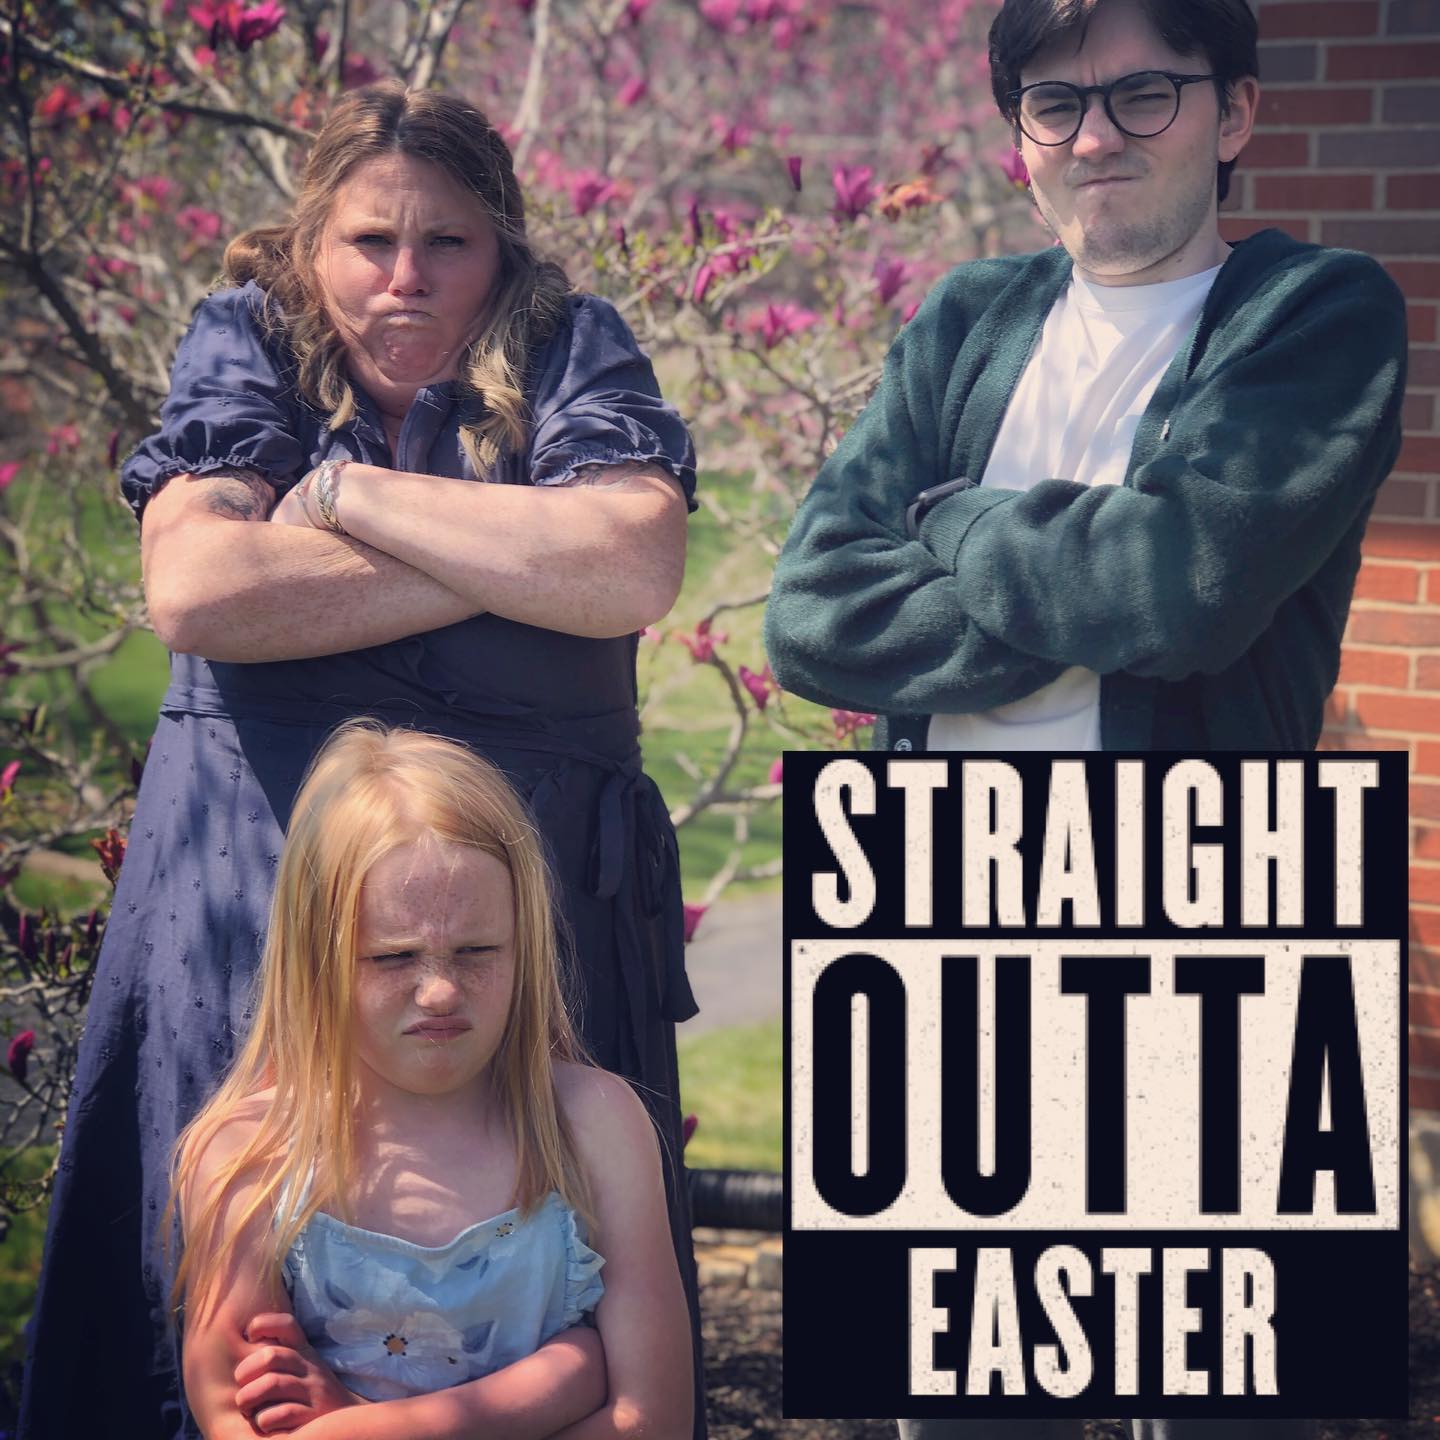 Straight Outta Easter.